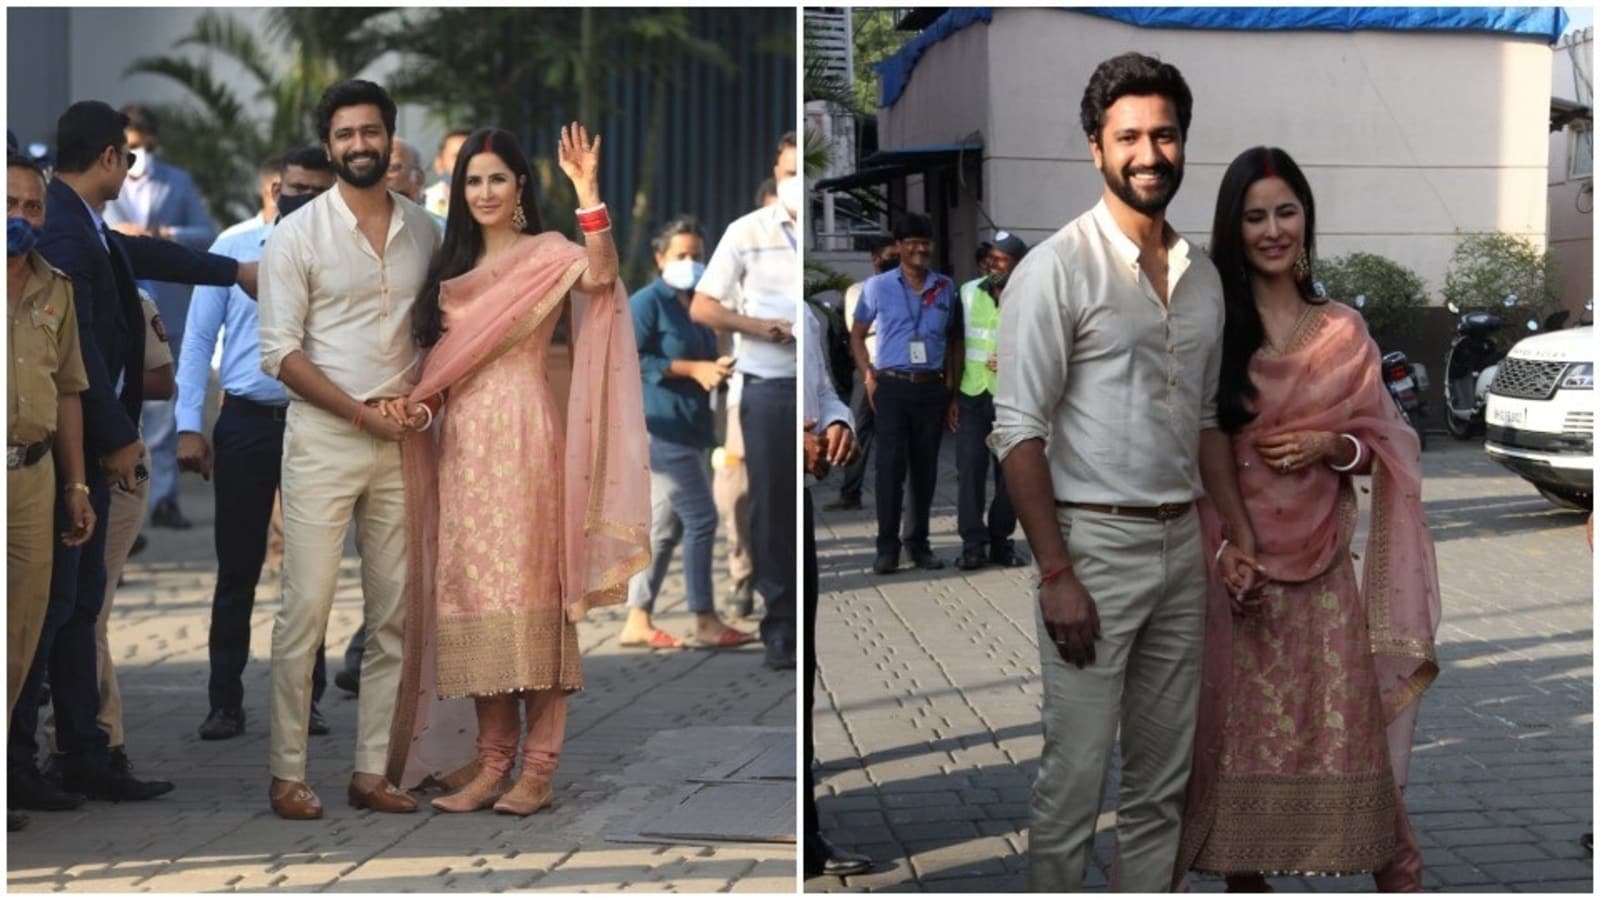 Katrina Kaif, Vicky Kaushal return from honeymoon with big smiles, hold hands as they pose for paparazzi. See pics | Bollywood - Hindustan Times